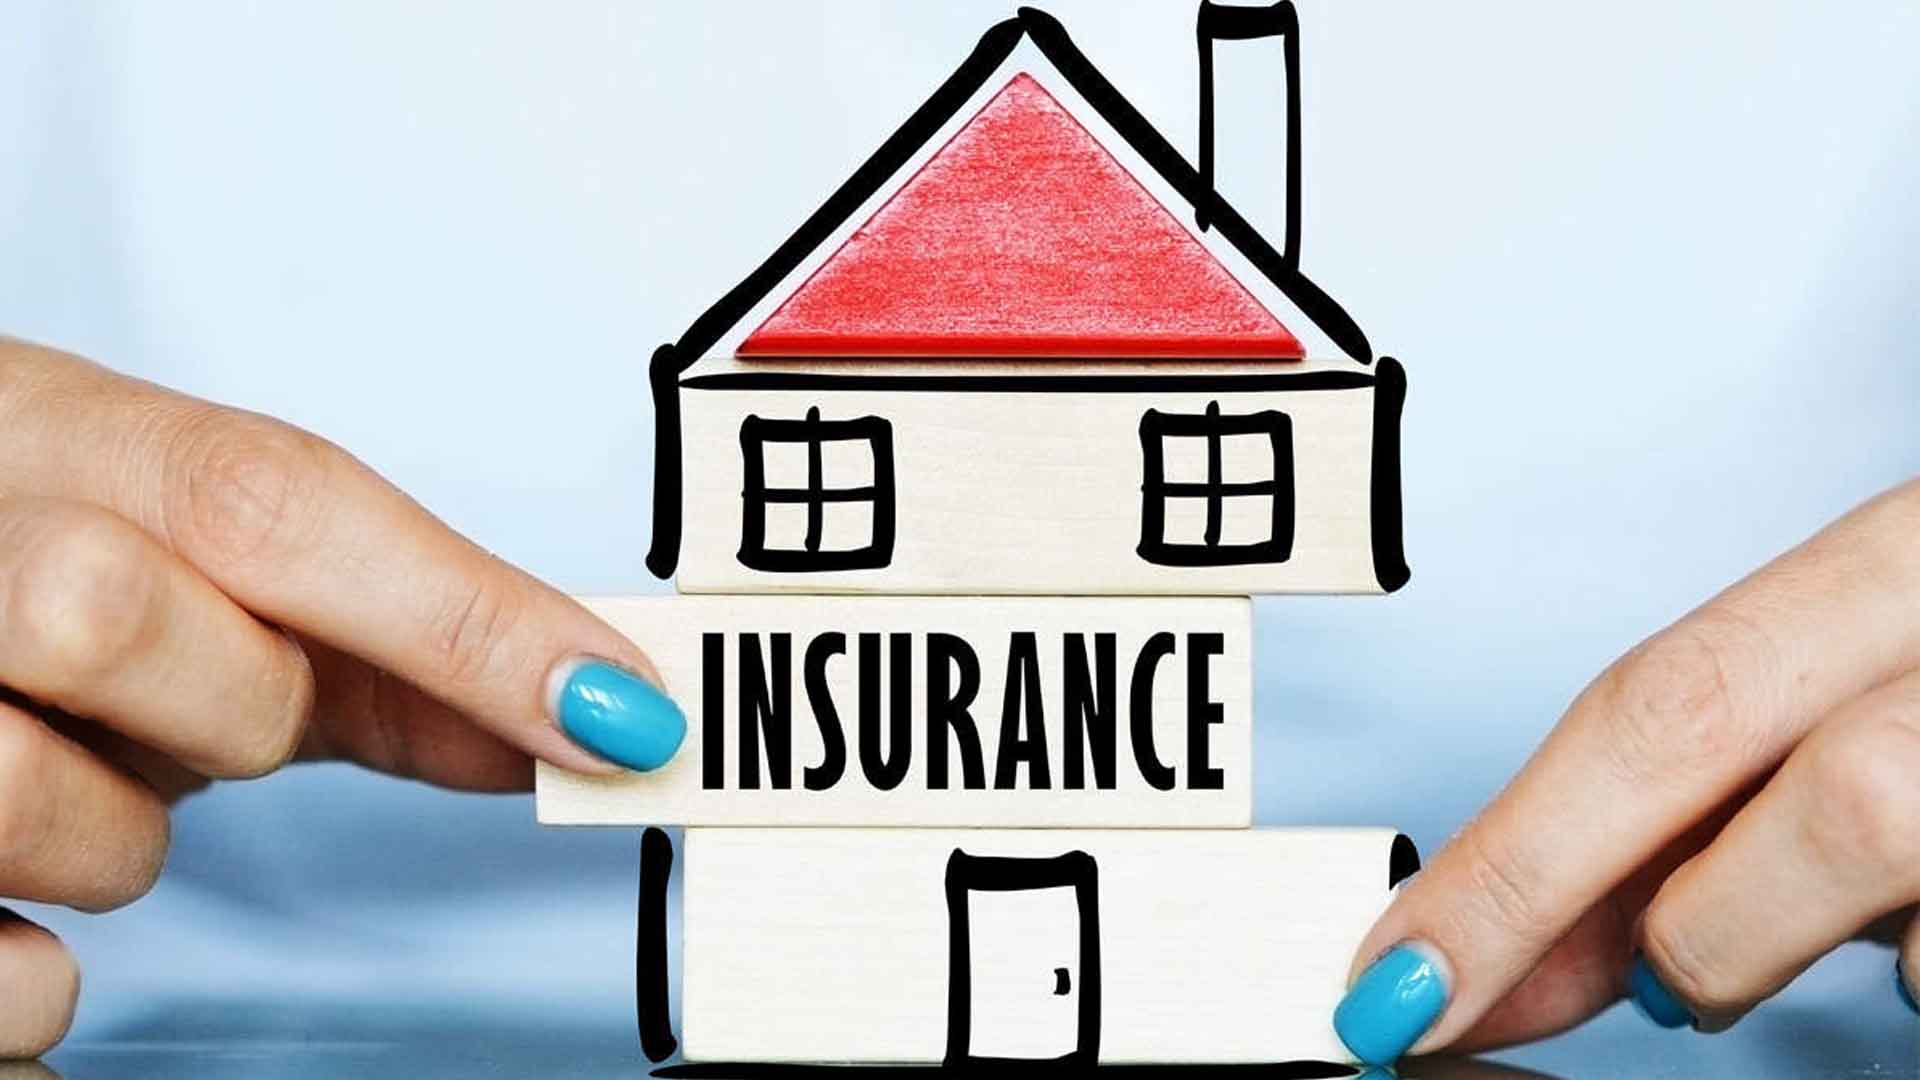 Housing Insurance policy